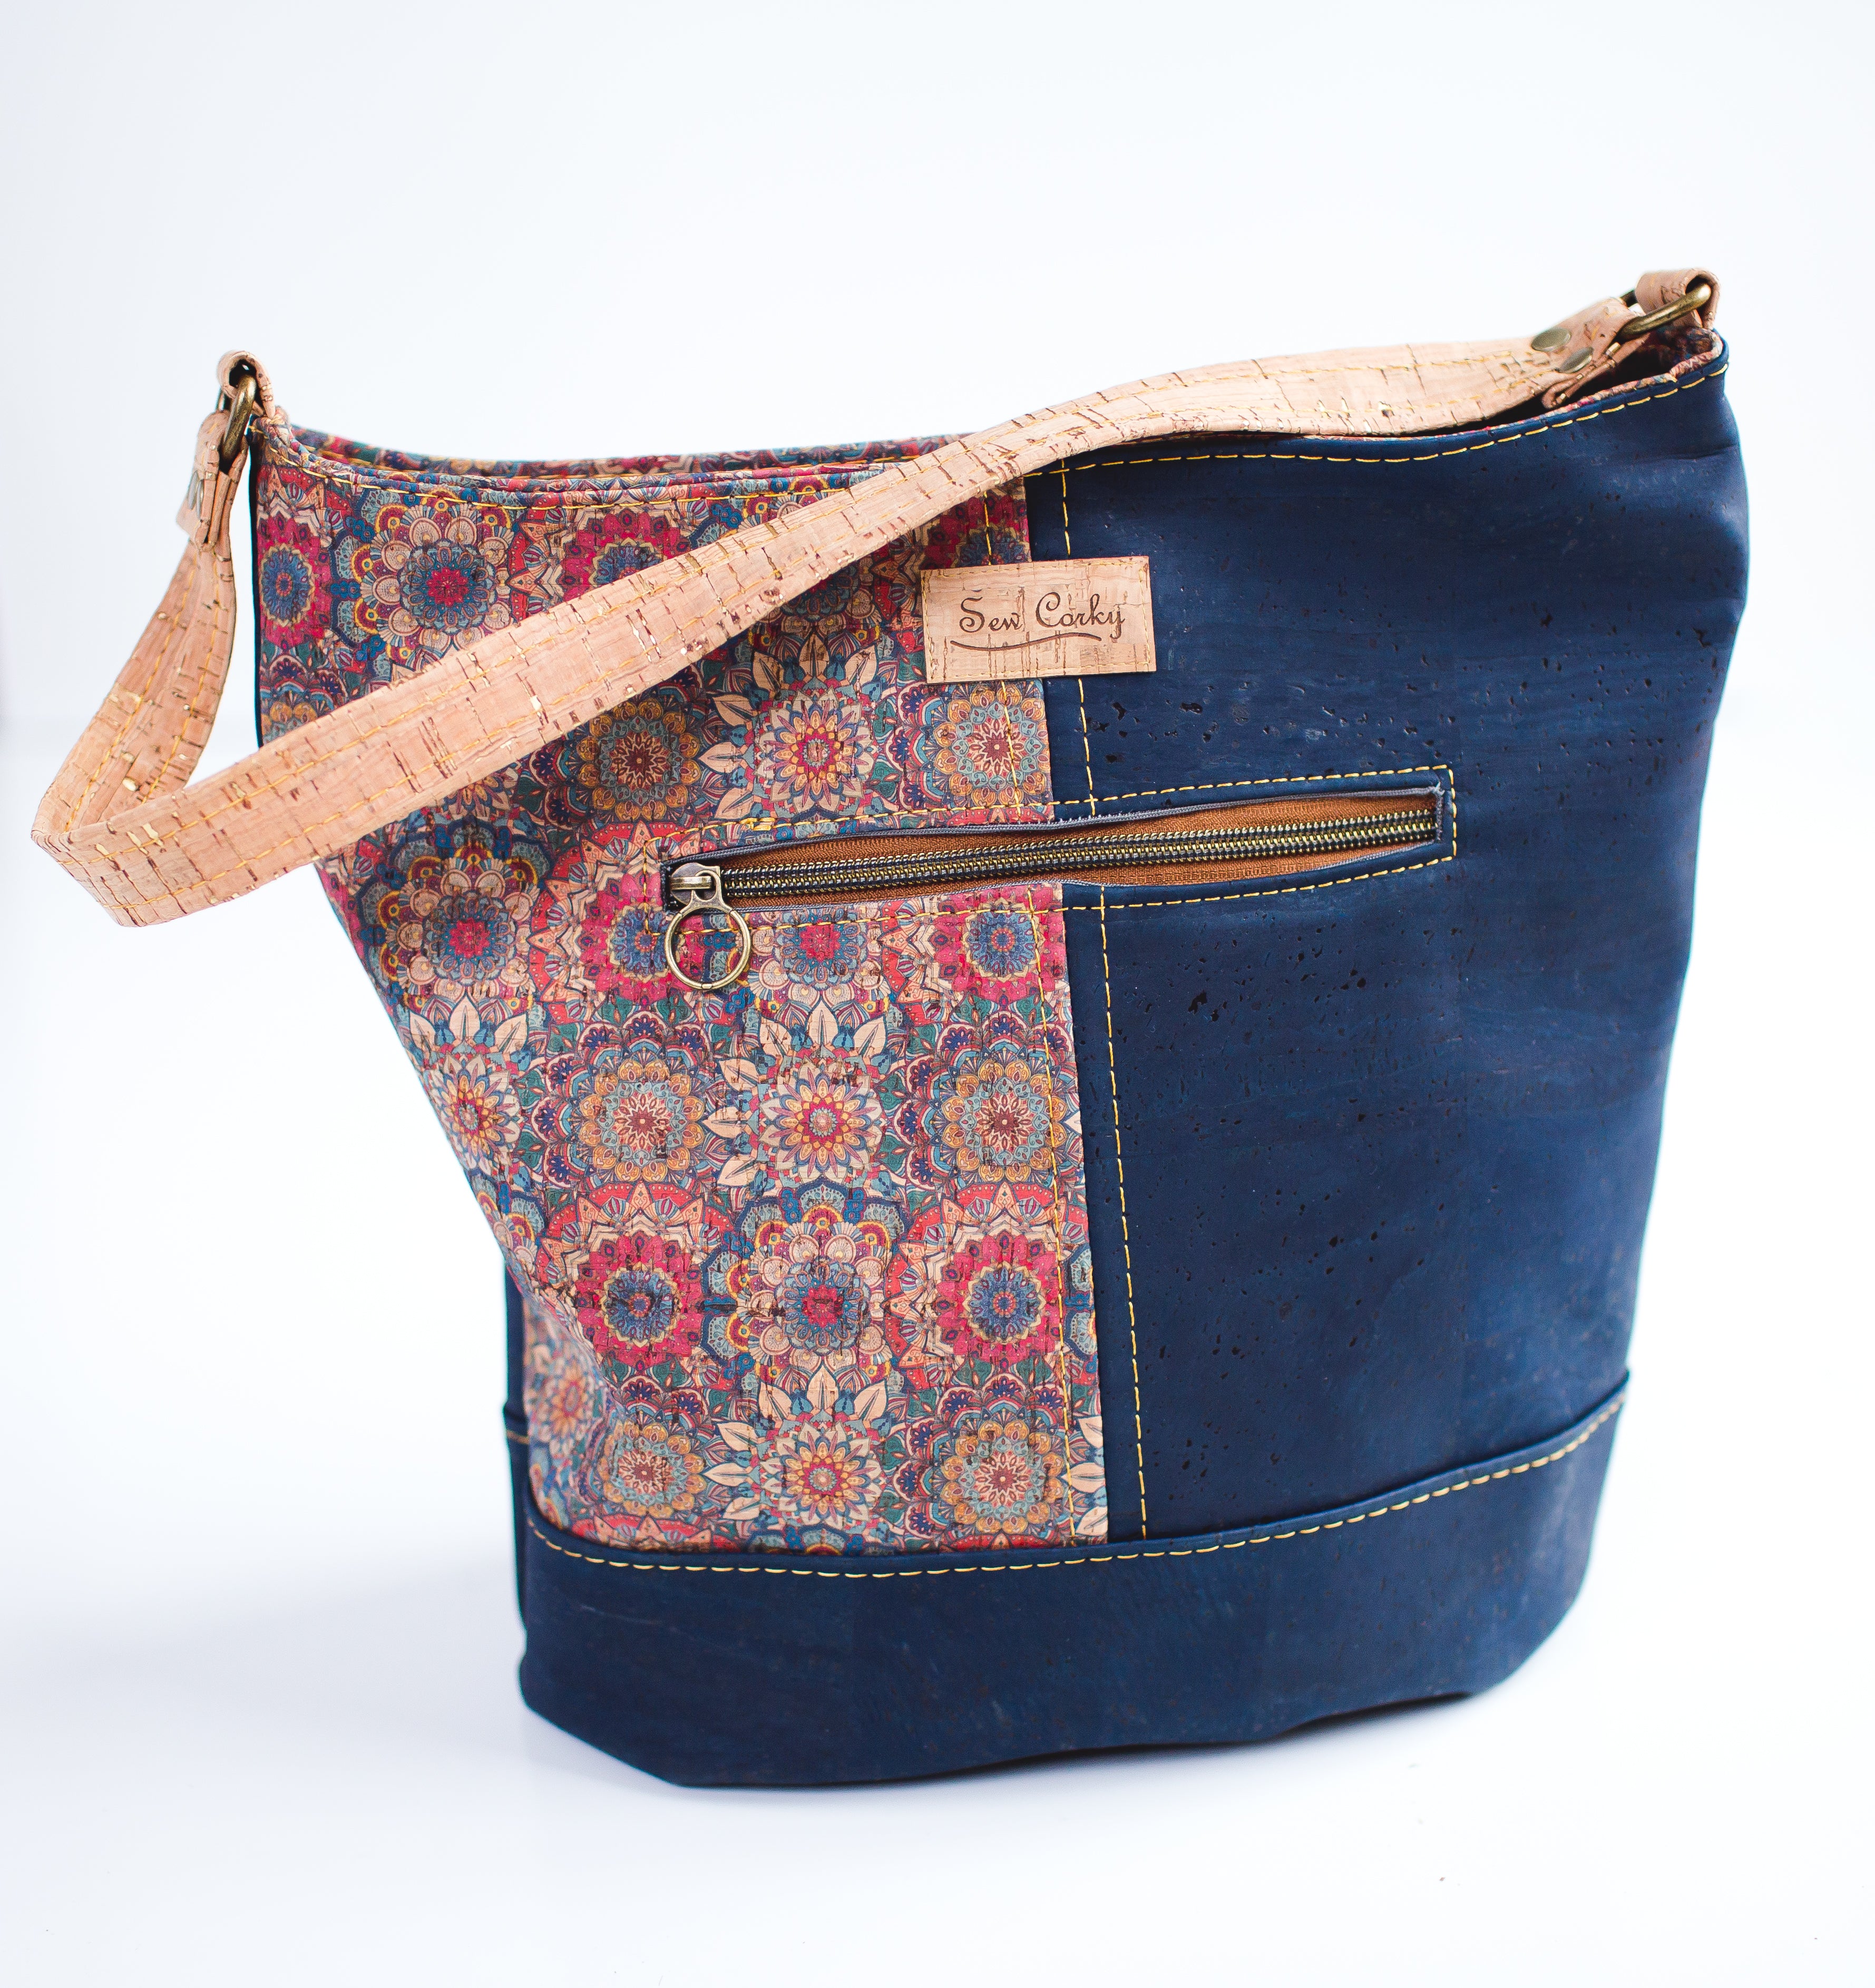 FF11-The Norah Bucket Handbag in Navy Blue and Red Floral Print